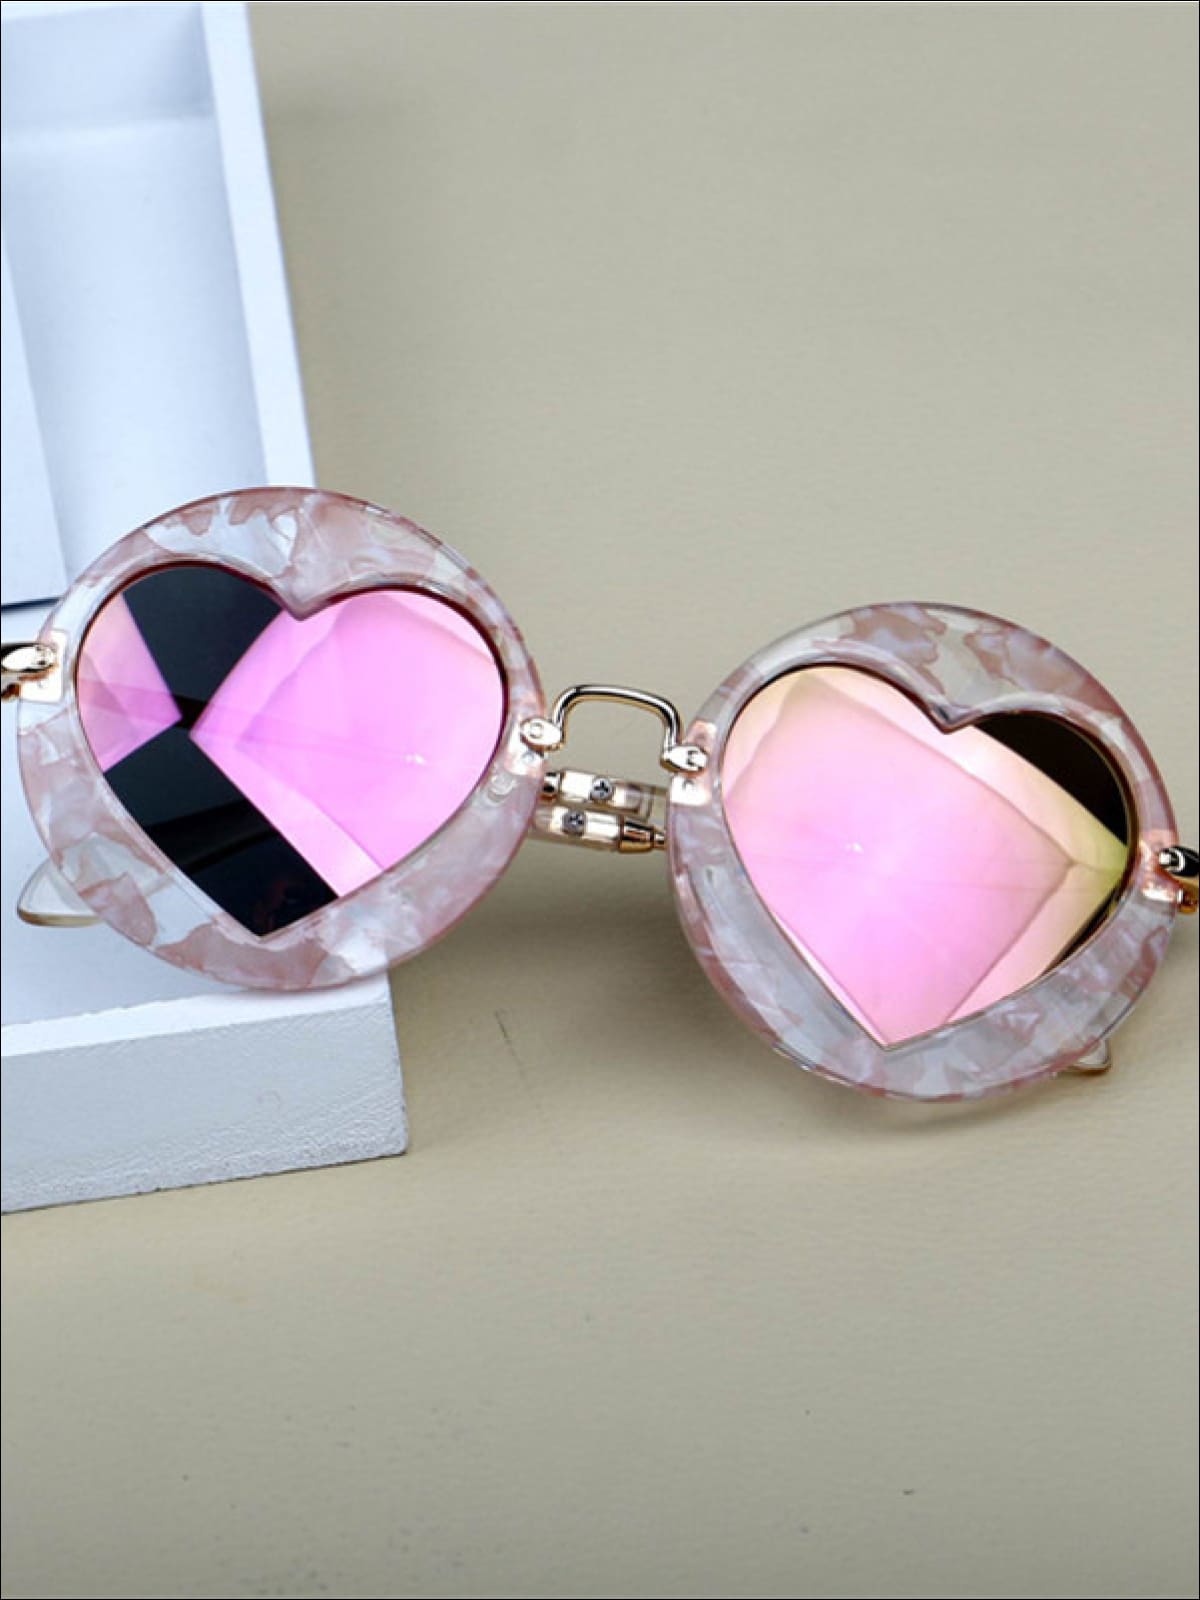 Girls Luxury Heart Shaped Marble Framed Sunglasses - Pink - Girls Accessories